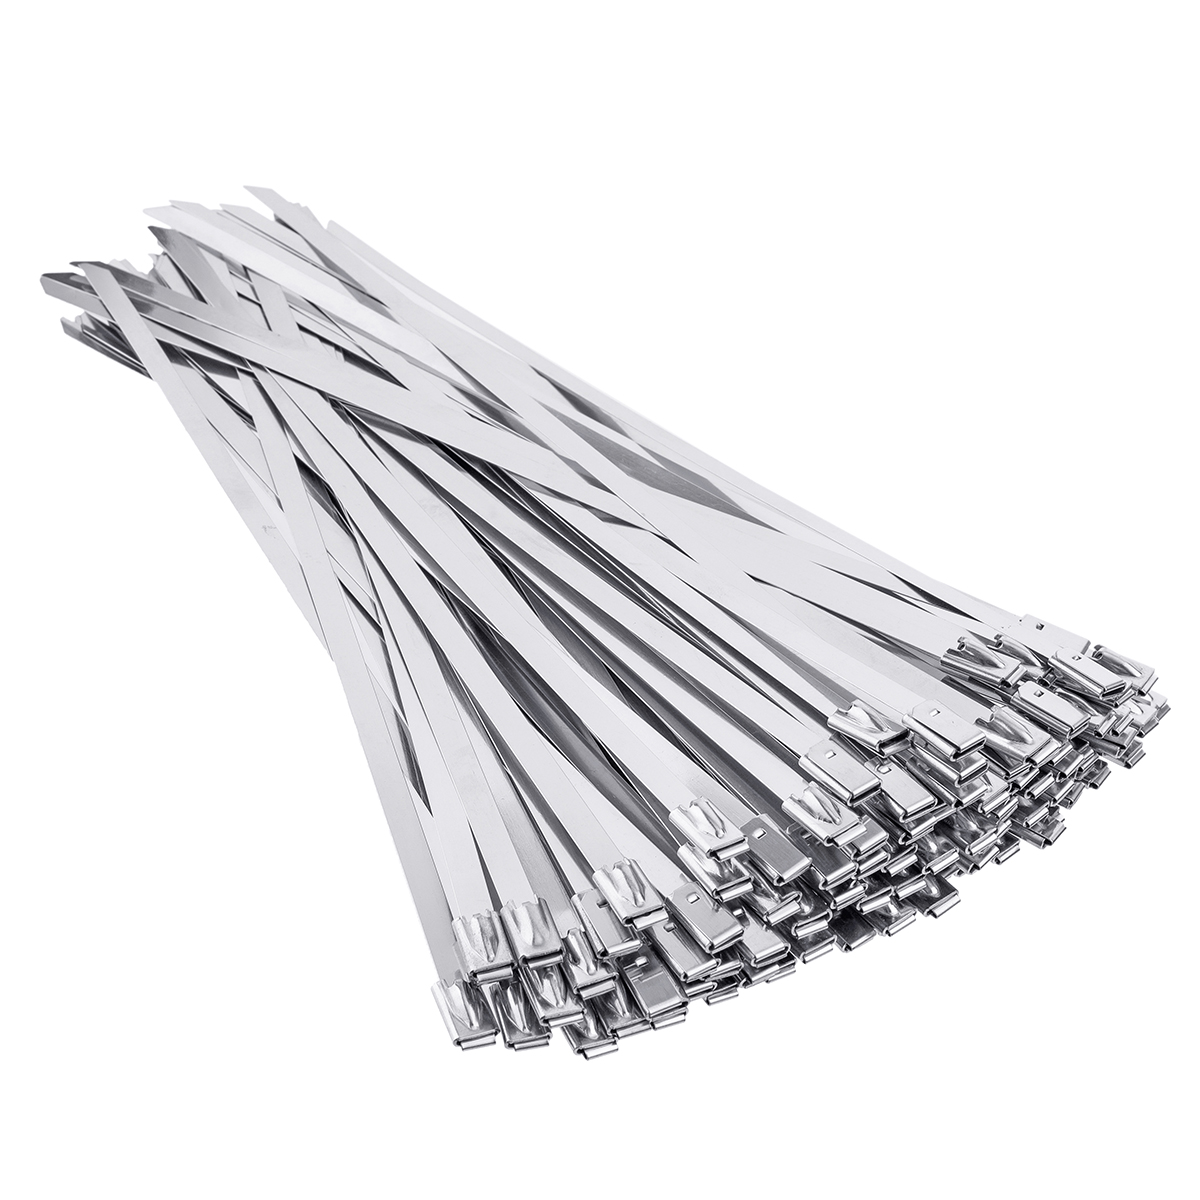 100Pcs-46x200mm-Stainless-Steel-Zip-Tie-Exhaust-Wrap-Coated-Locking-Cable-Ties-1377614